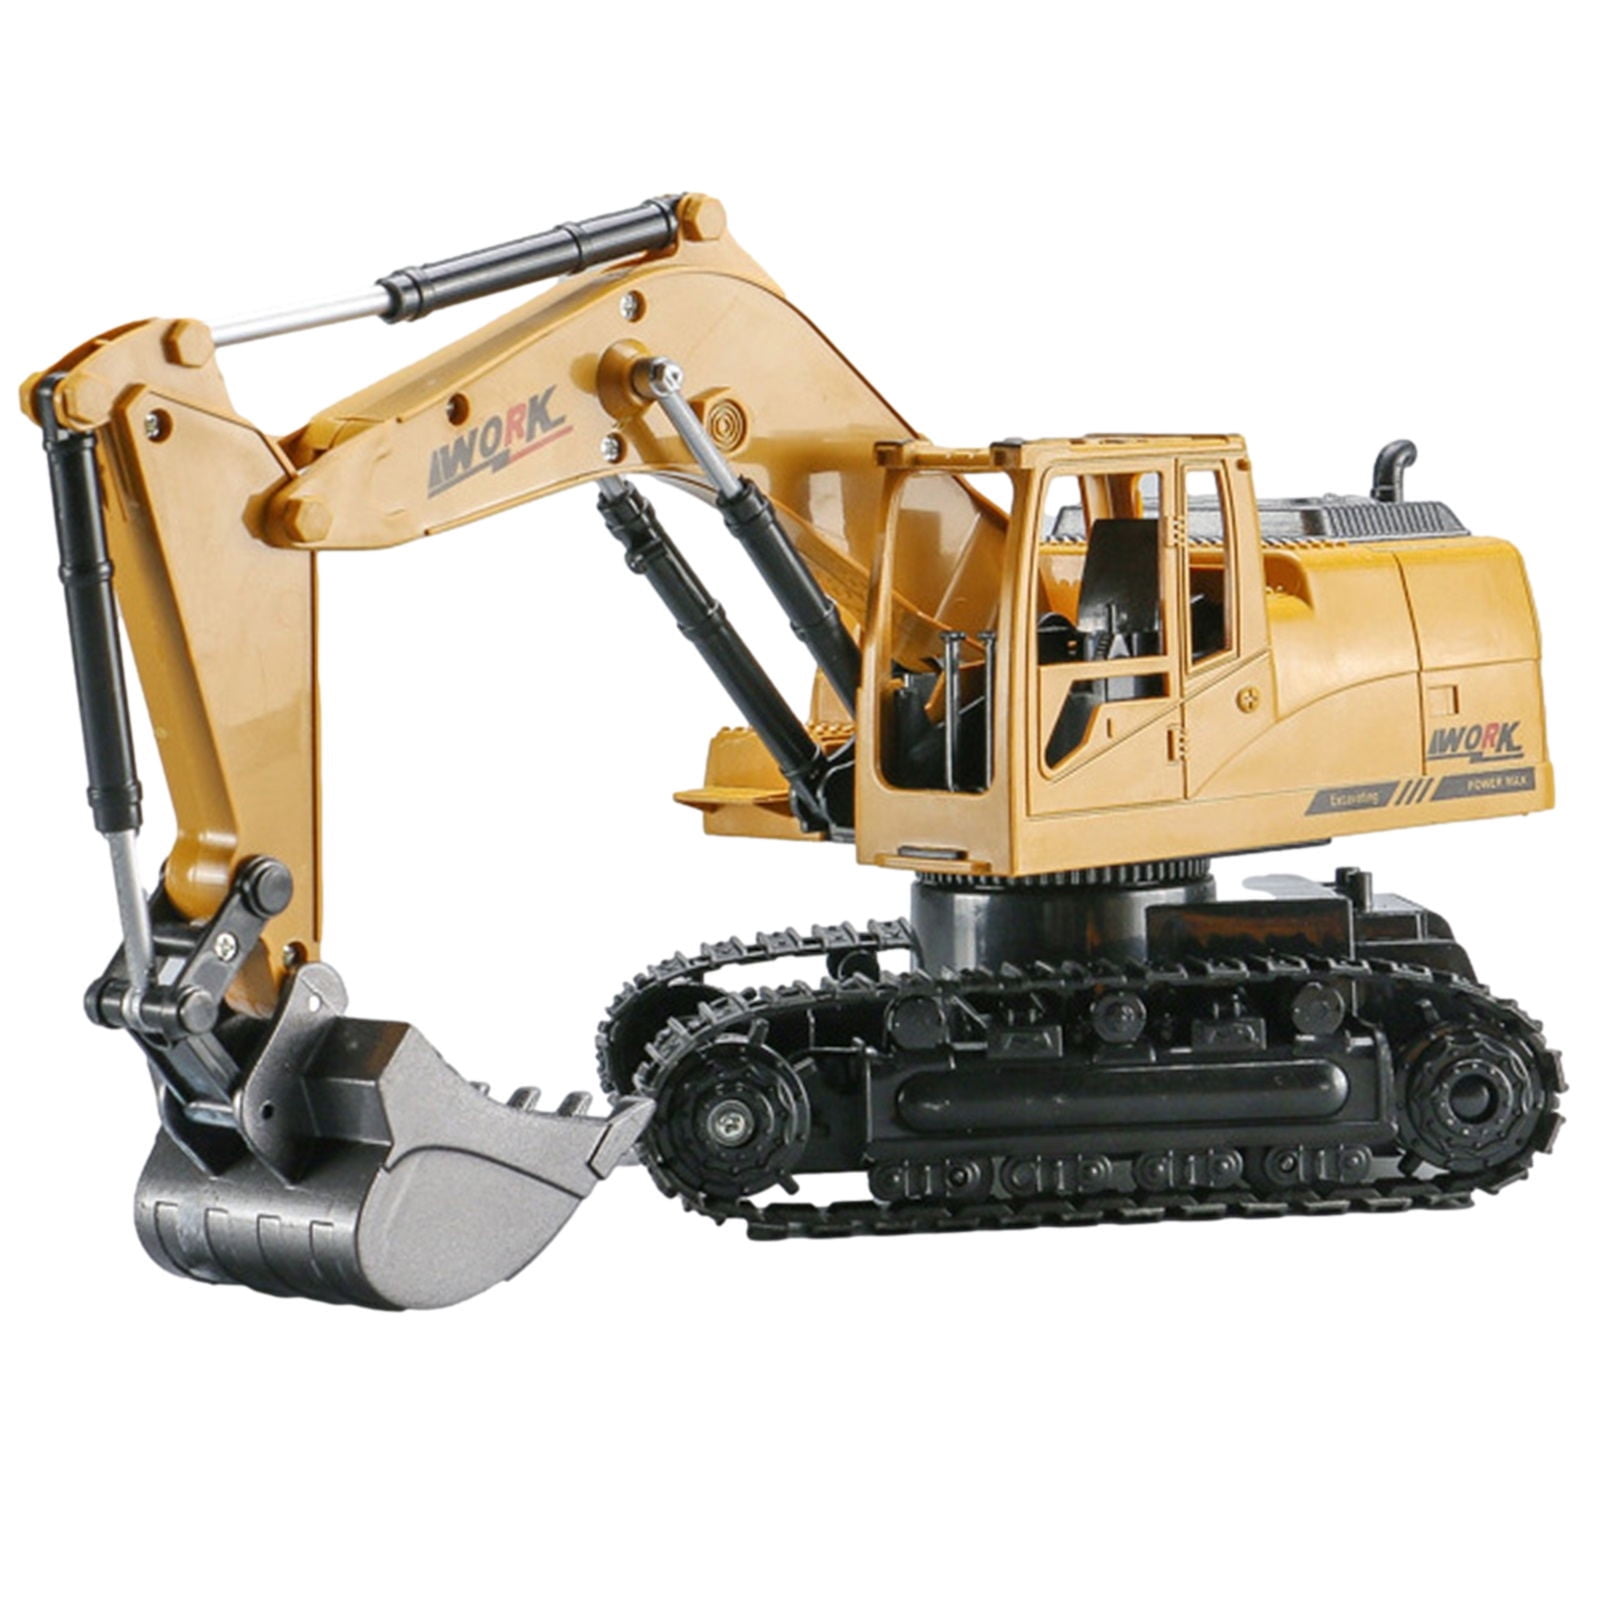 1:18 Remote Control 8 Channel 2WD Excavator Electric Construction Tractor Toys